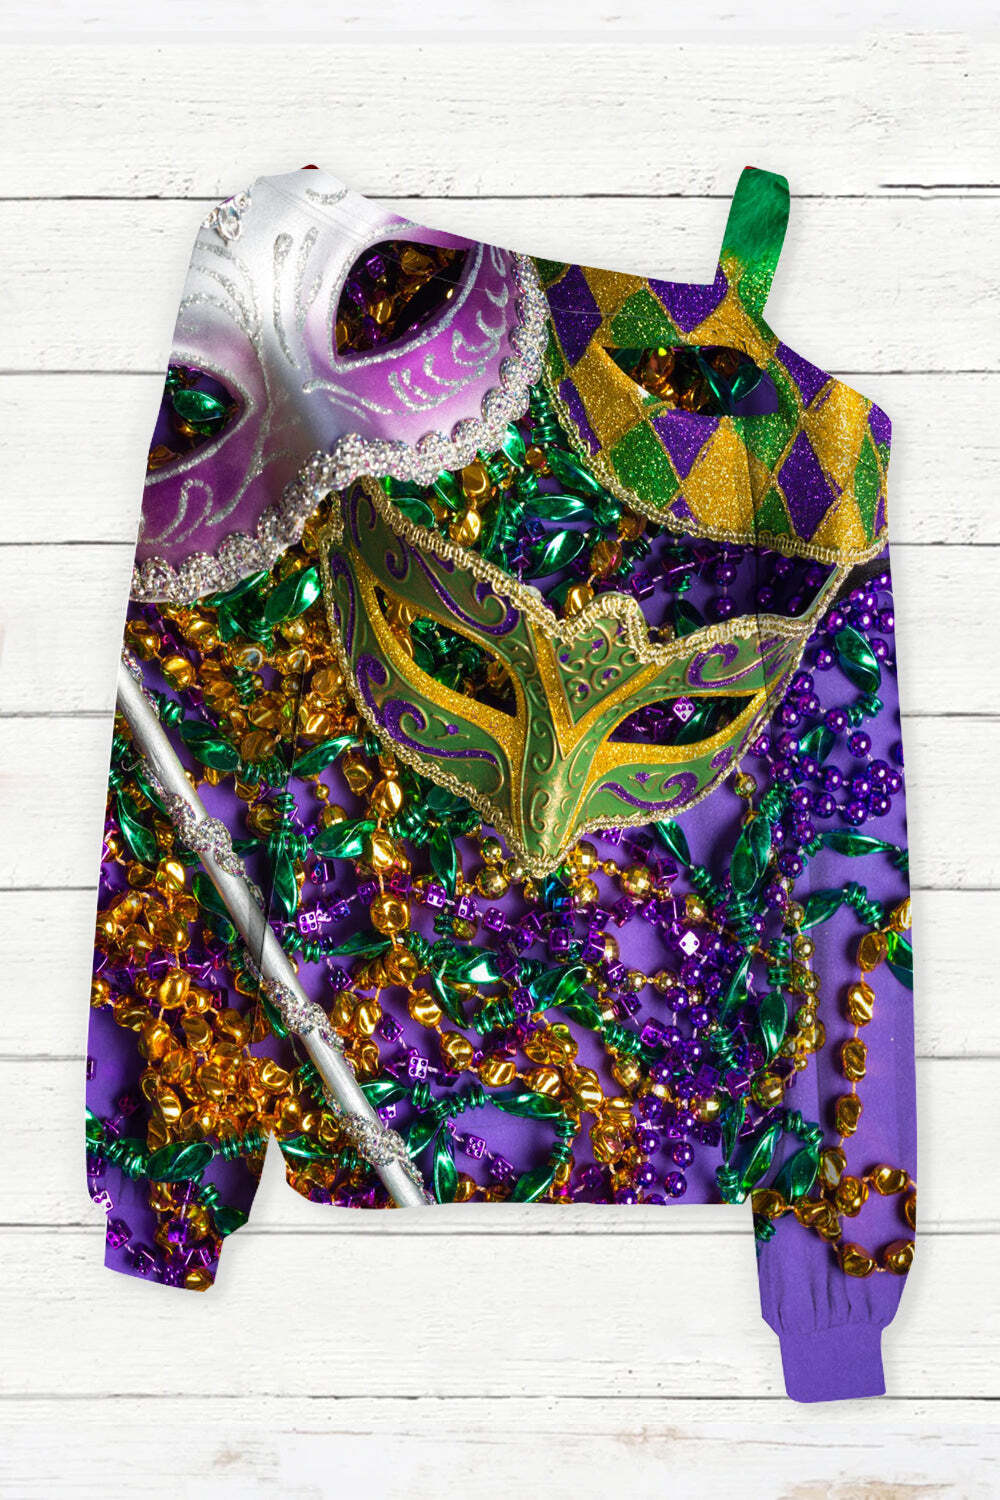 [CLEARANCE SALE]Mardi Gras Sequin Mask With Colored Beads Off-Shoulder Blouse